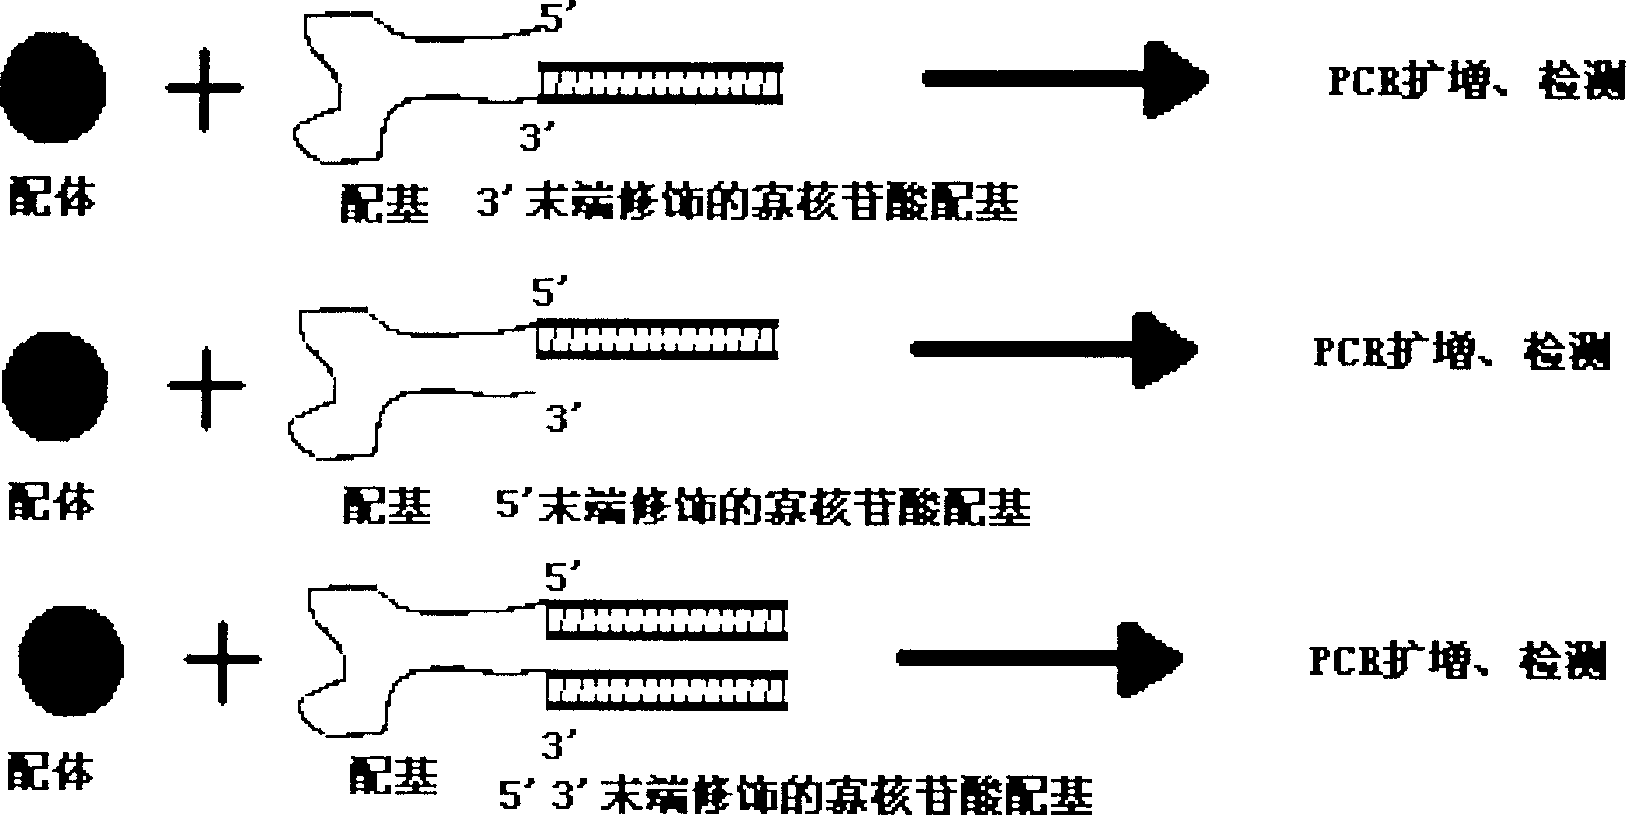 Antigen and ligand PCR pipe detecting reagent case, its manufacturing method and application